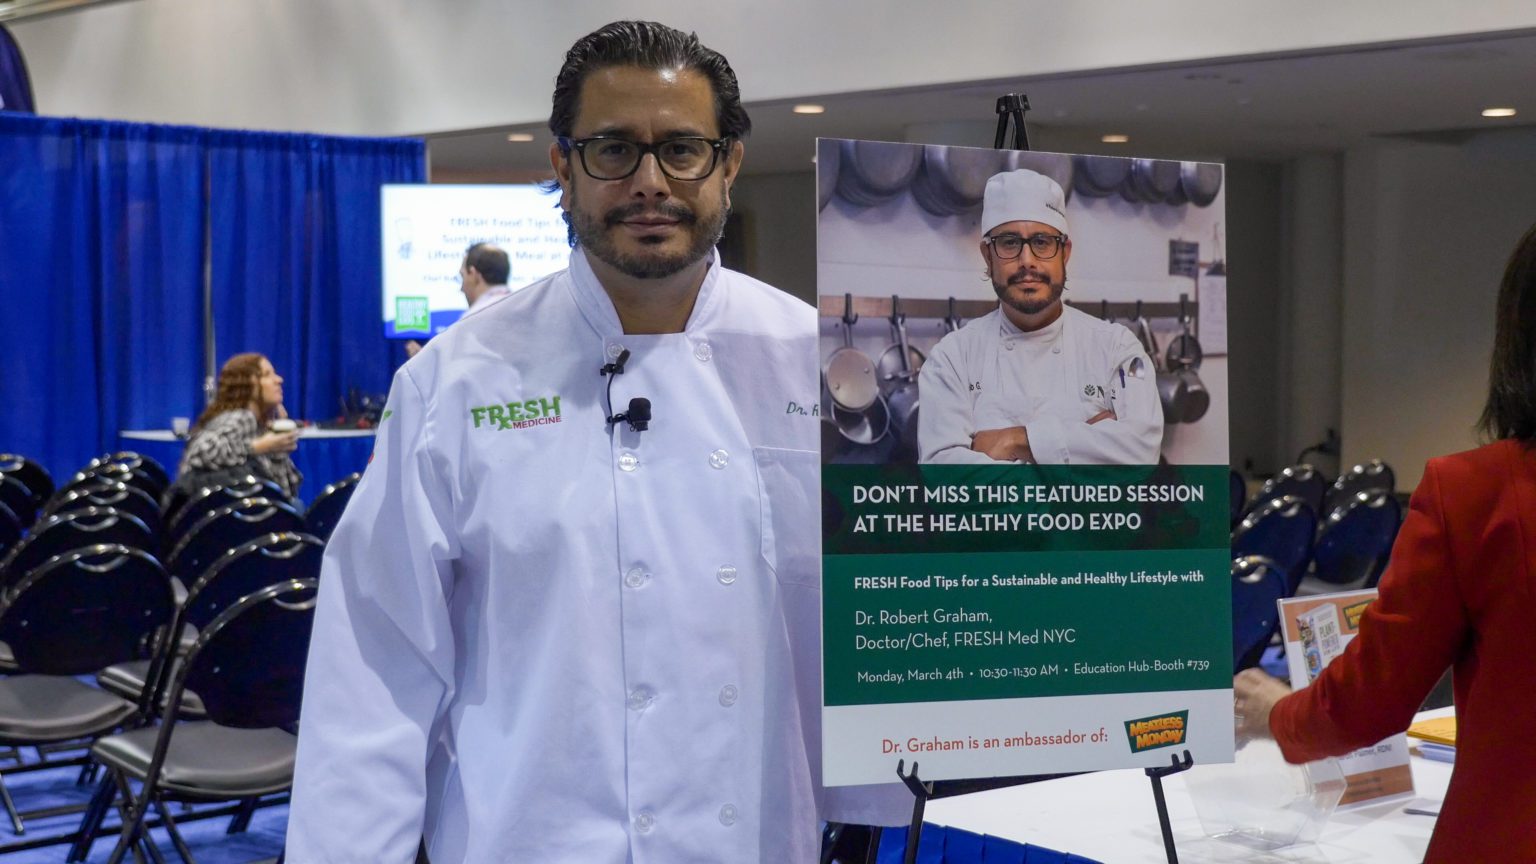 Newswise: Doc/Chef Robert Graham, Co–Founder of FRESH Medicine and Global Meatless Monday Nutrition Ambassador to hold educational session at the Healthy Food Expo New York